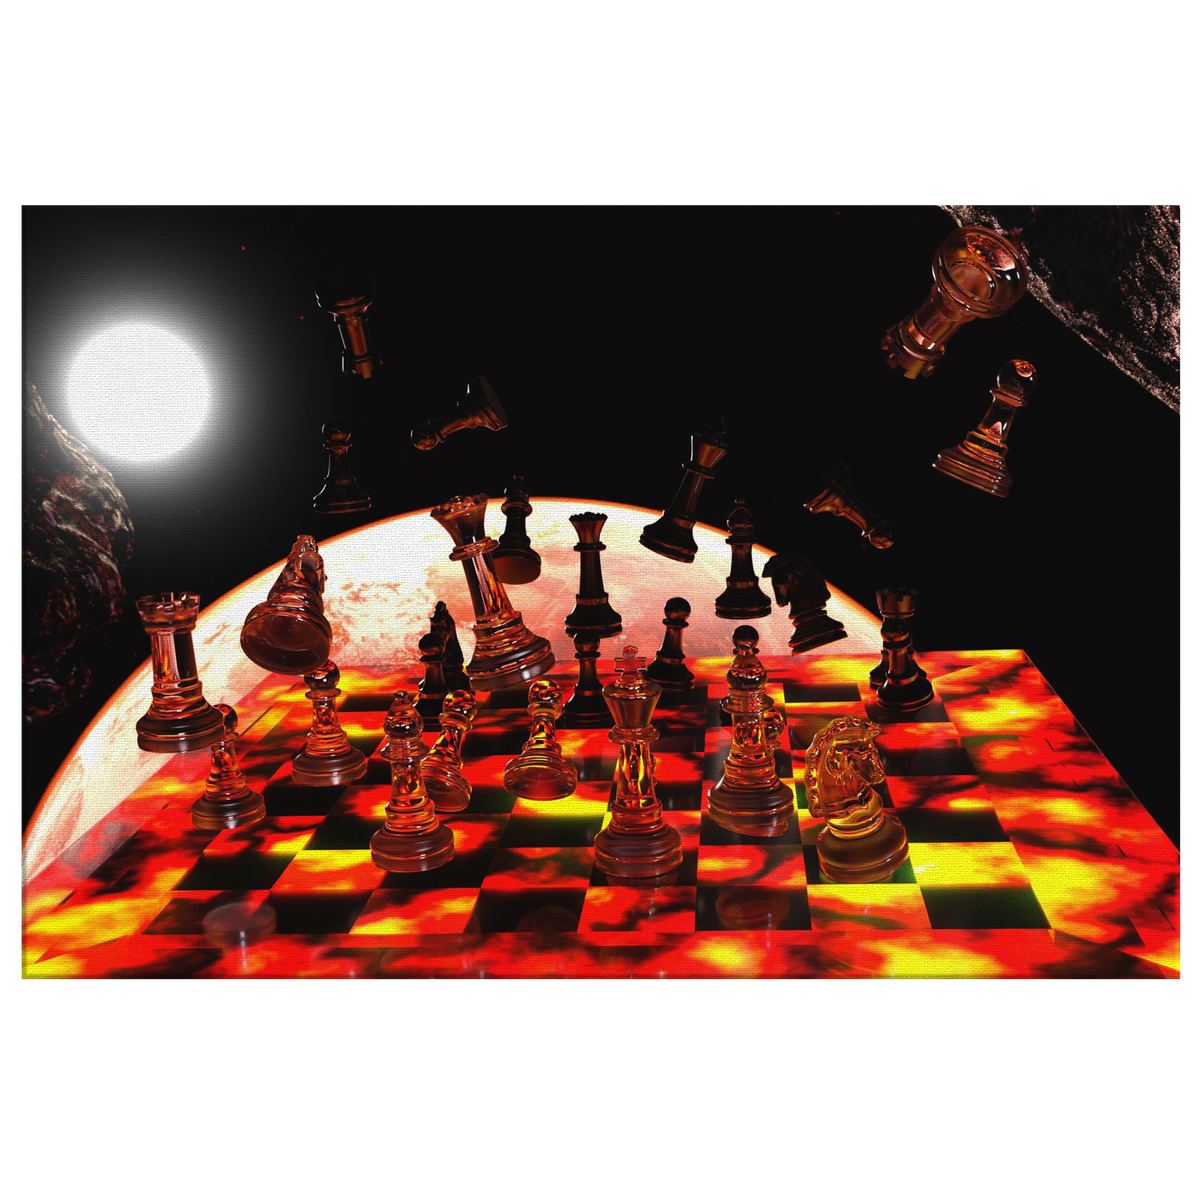 Space Chess - Rectangle Gallery Canvas Art